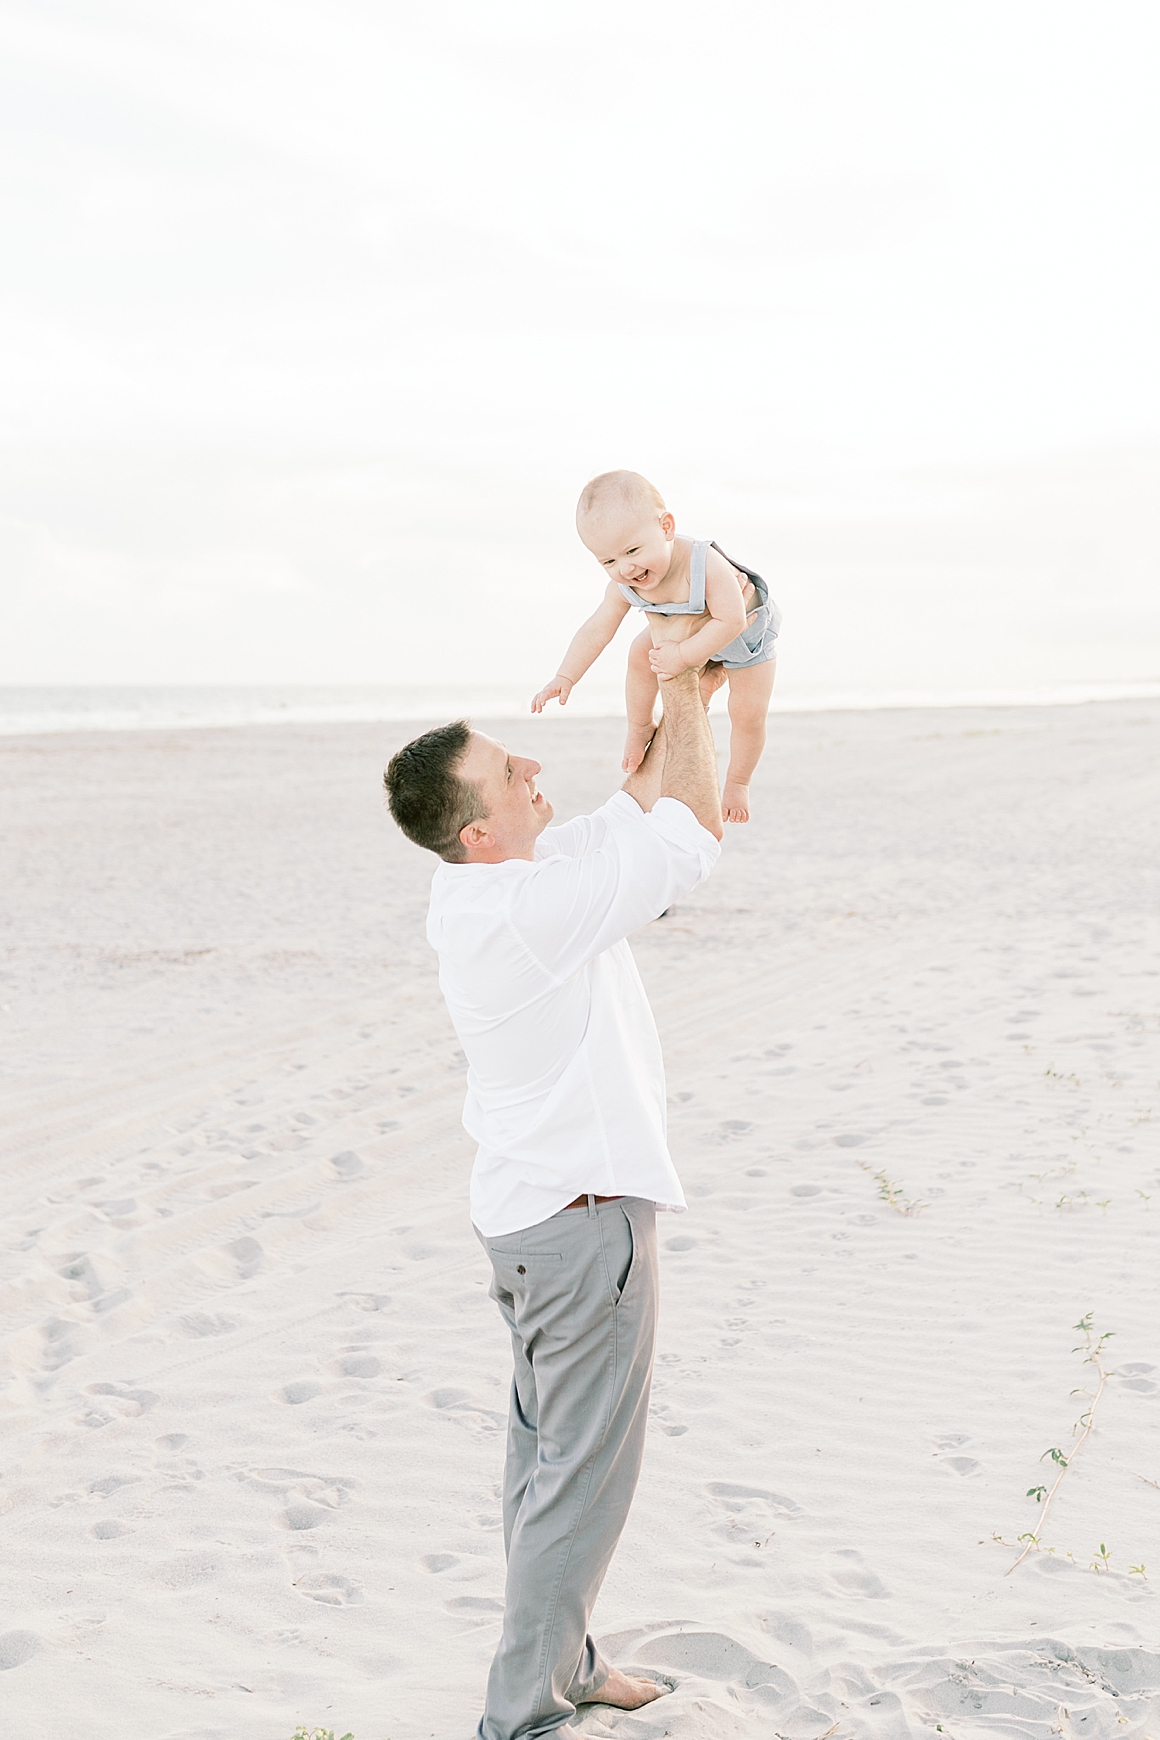 Dad playing airplane with his son during first birthday photoshoot. Photos by Caitlyn Motycka Photography.